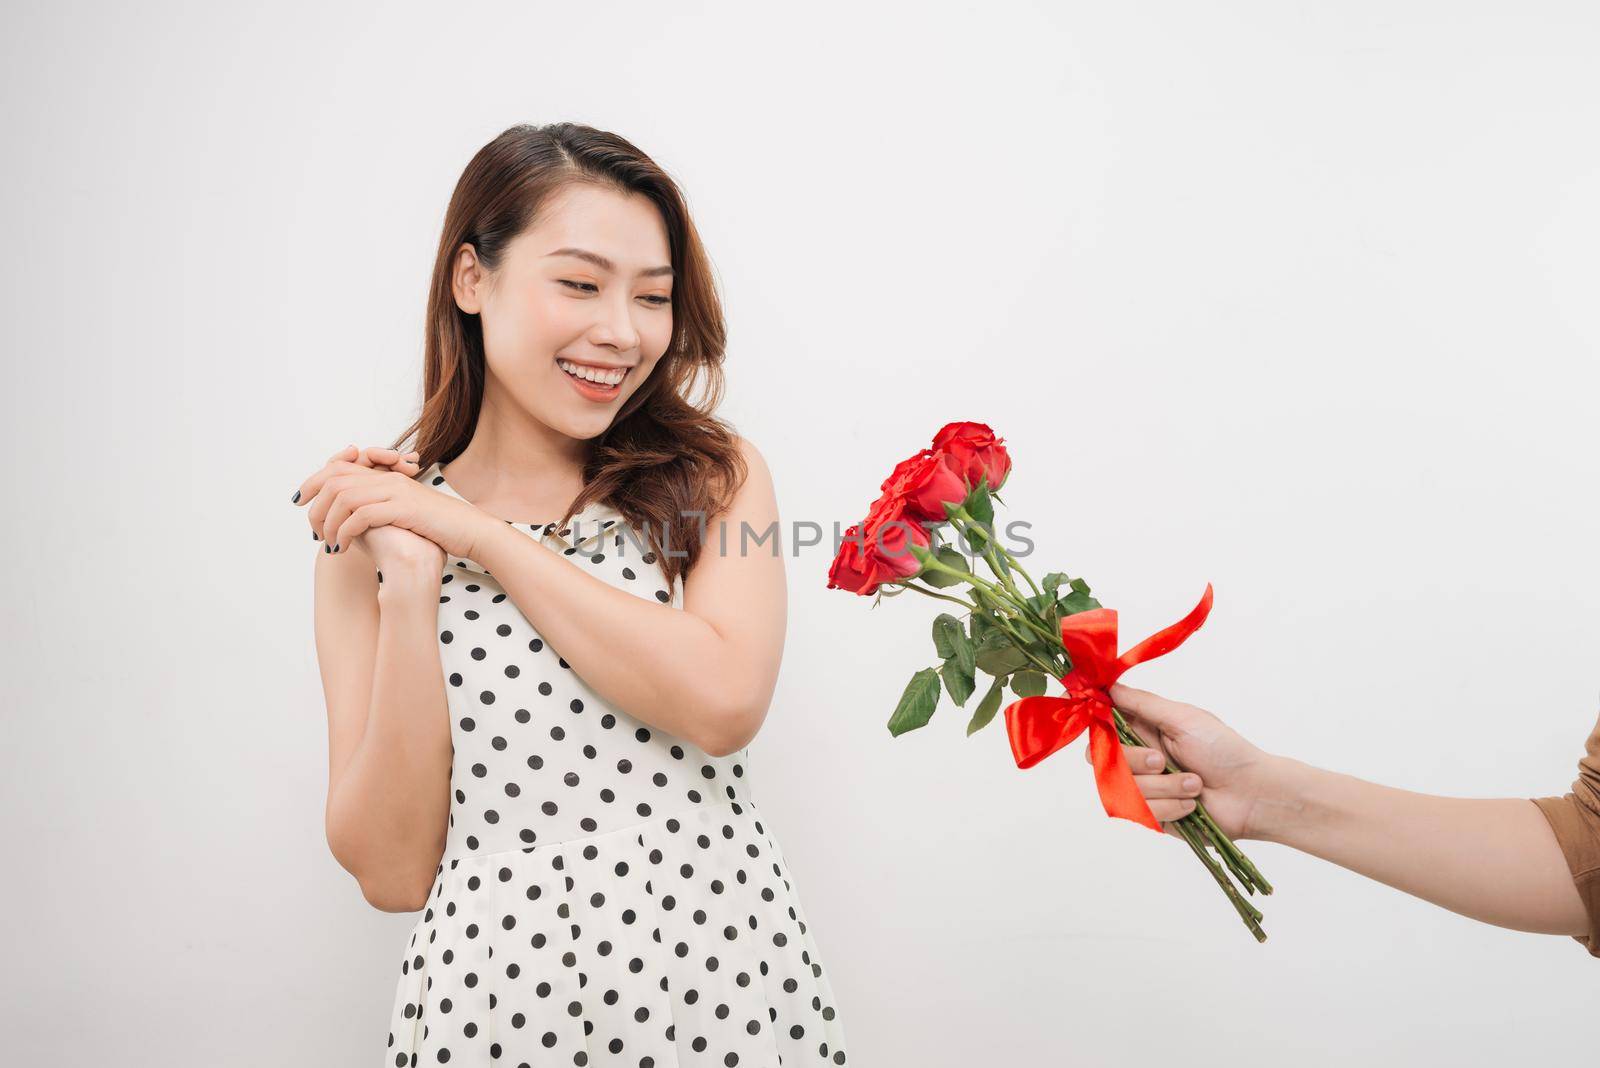 Cheerful charming young woman receiving bunch of flowers from her boyfriend over white background